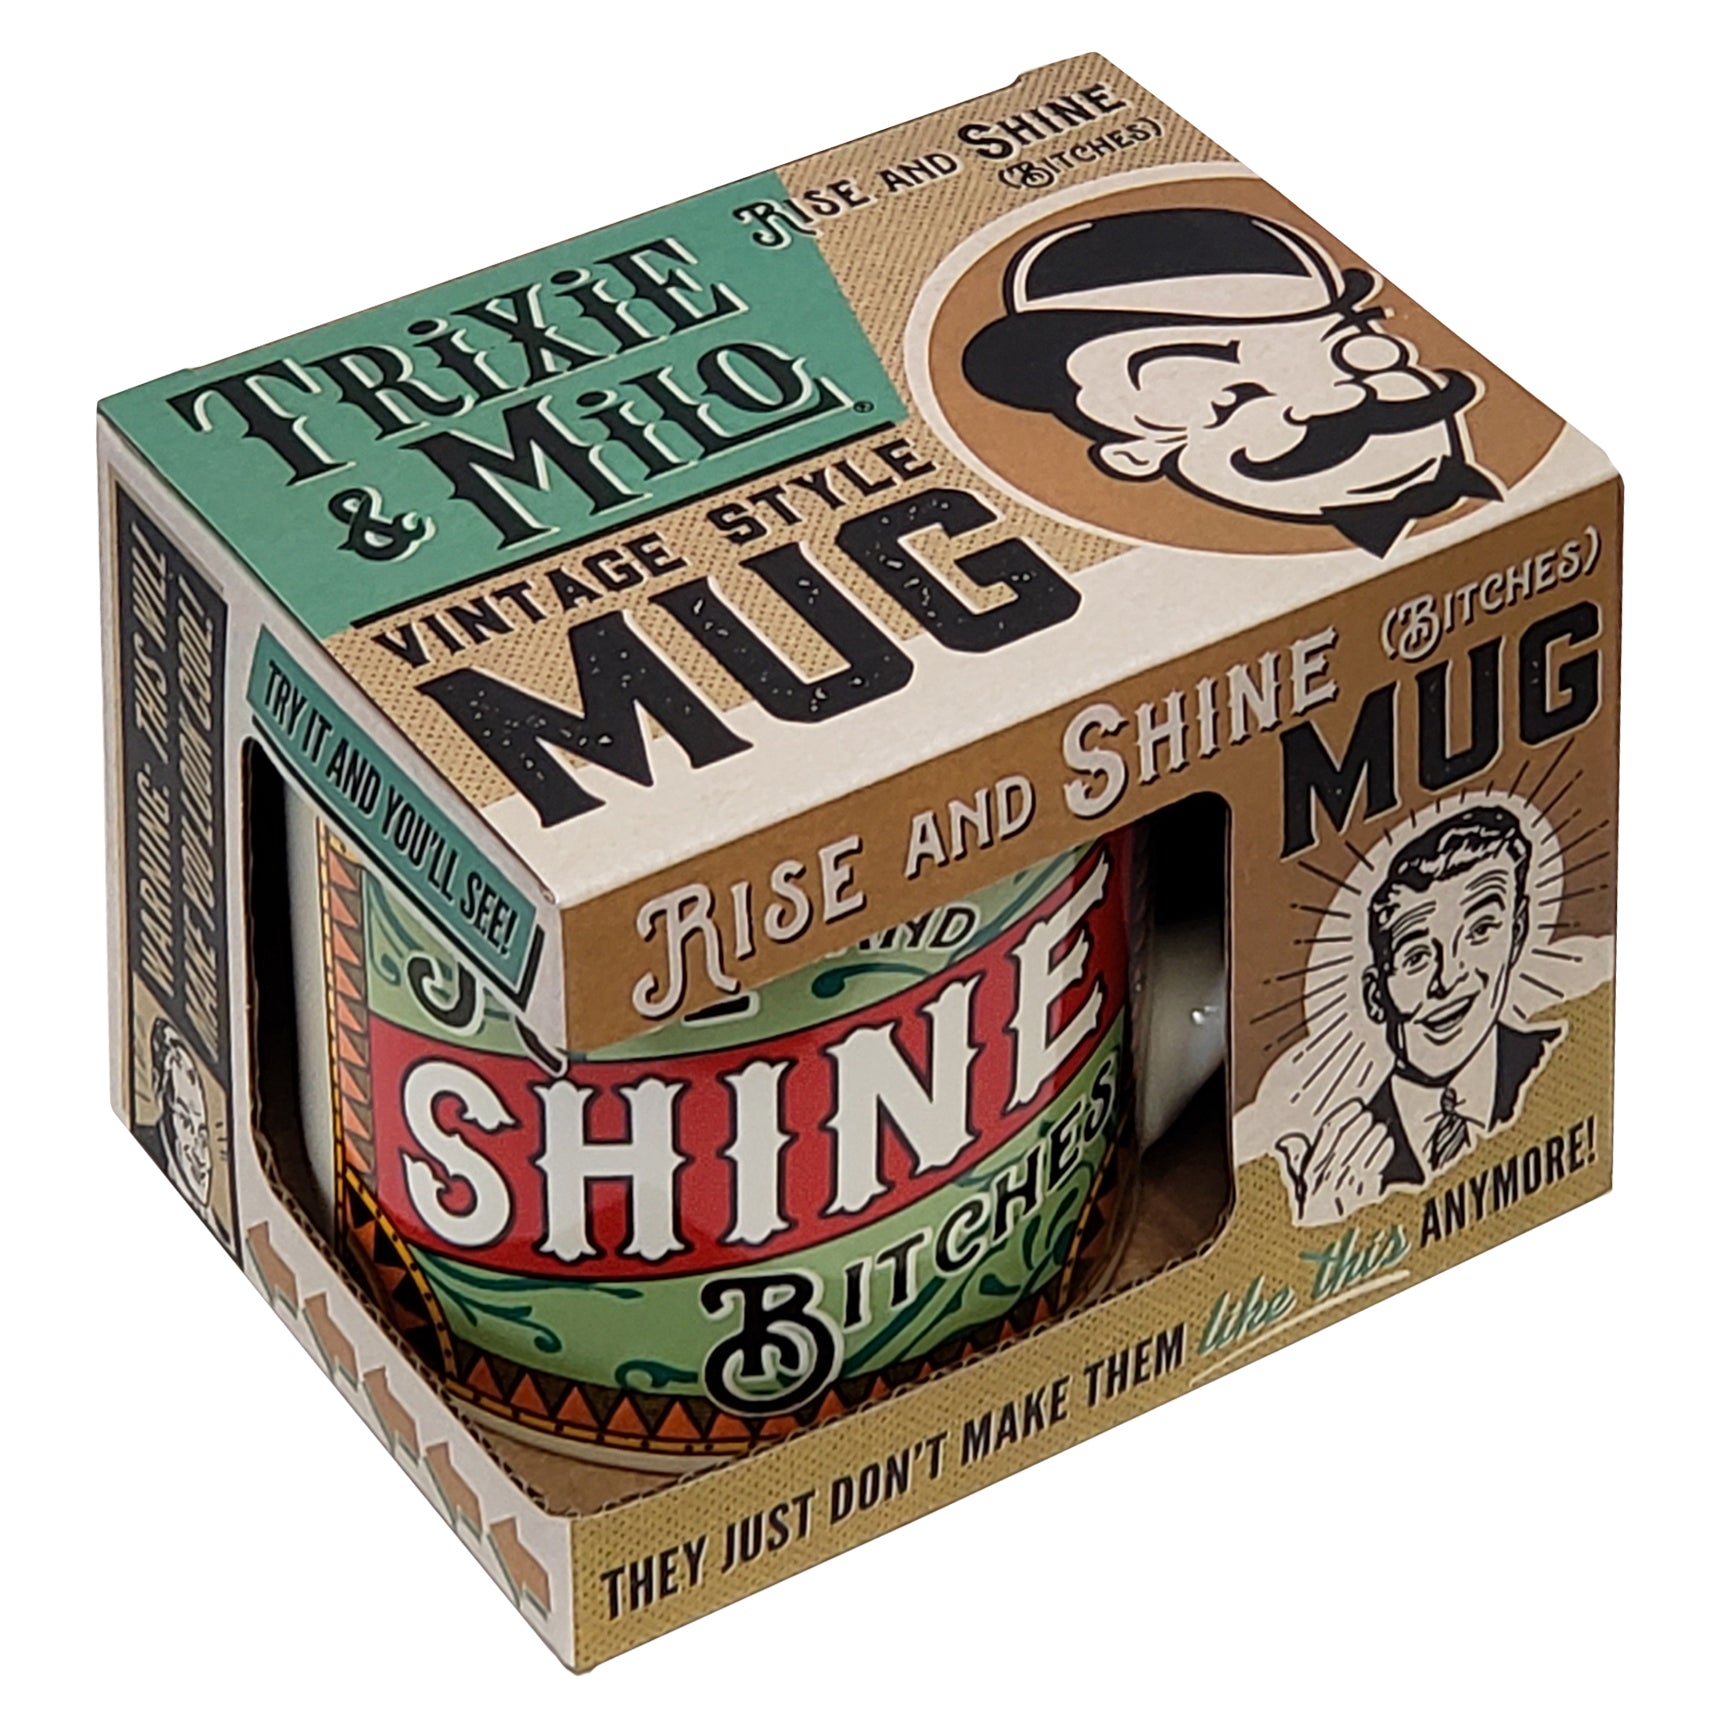 ceramic tea or coffee mug. cafe cup reads "Rise and Shine Bitches" in white, red, green, orange and black retro vintage style presented in kitschy gift box